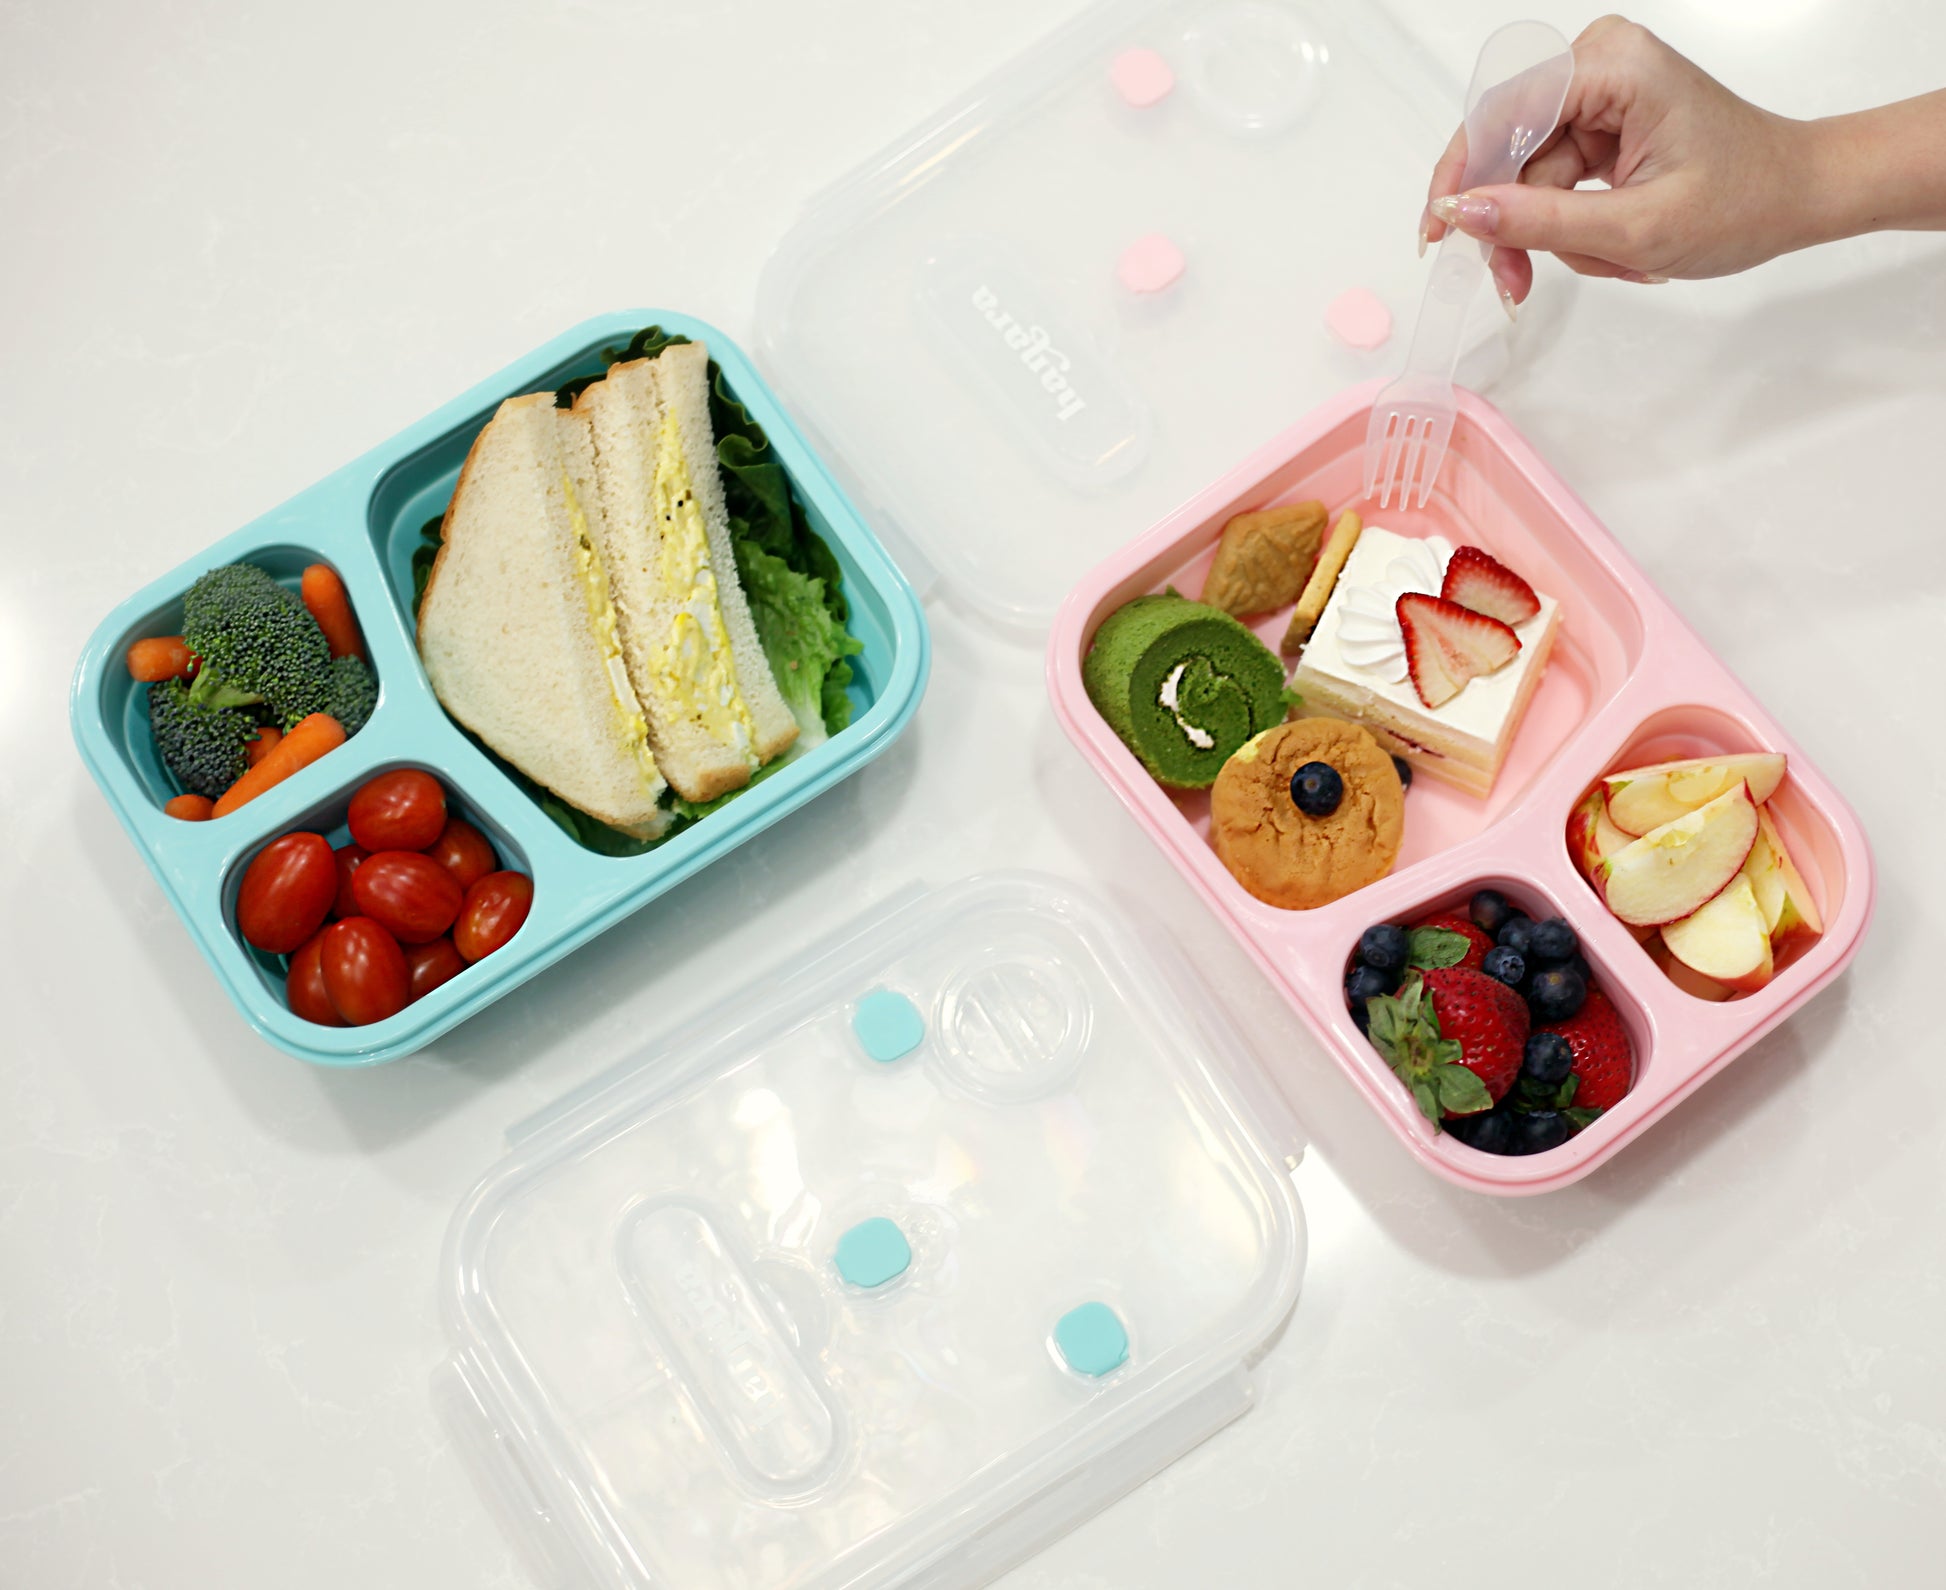 Silicone Lunch Box, Heebyoo 4 Pack Collapsible Food Storage Containers with  Lids, Bento Lunch Boxes,…See more Silicone Lunch Box, Heebyoo 4 Pack